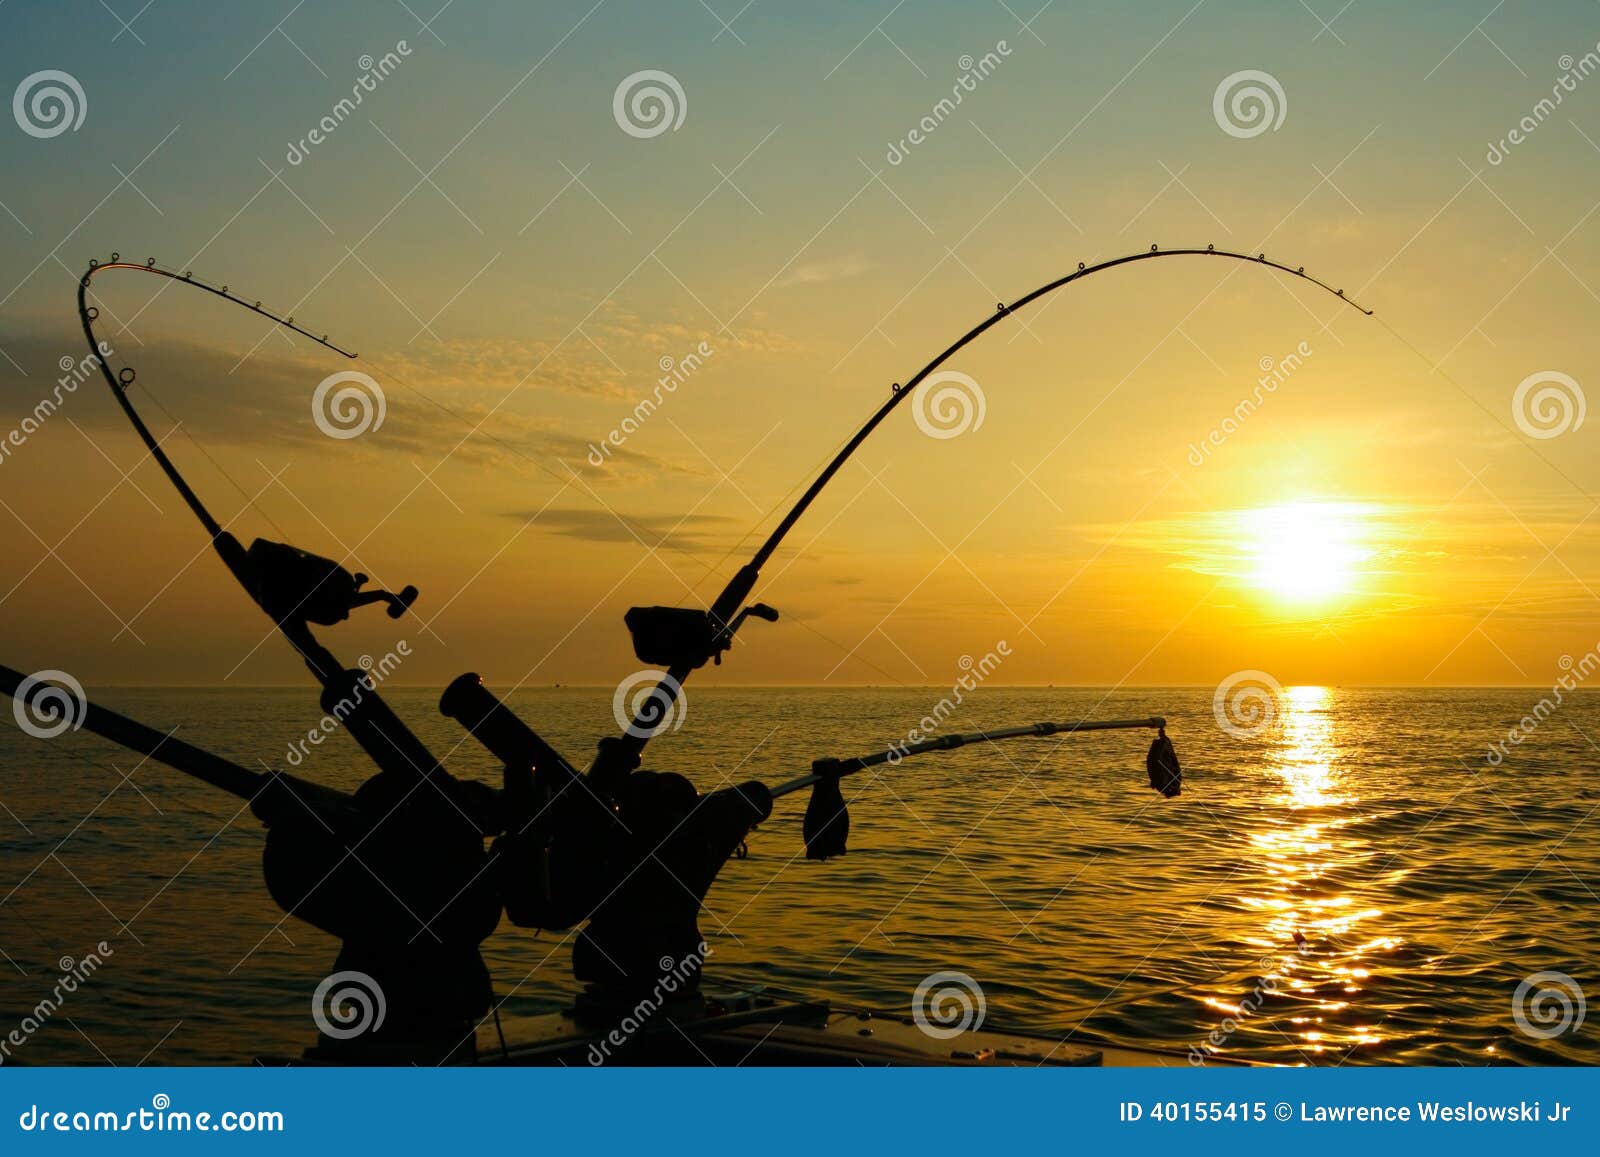 https://thumbs.dreamstime.com/z/downrigger-fishing-rods-salmon-sunrise-view-downriggers-which-used-to-catch-lake-trout-lake-ontario-40155415.jpg